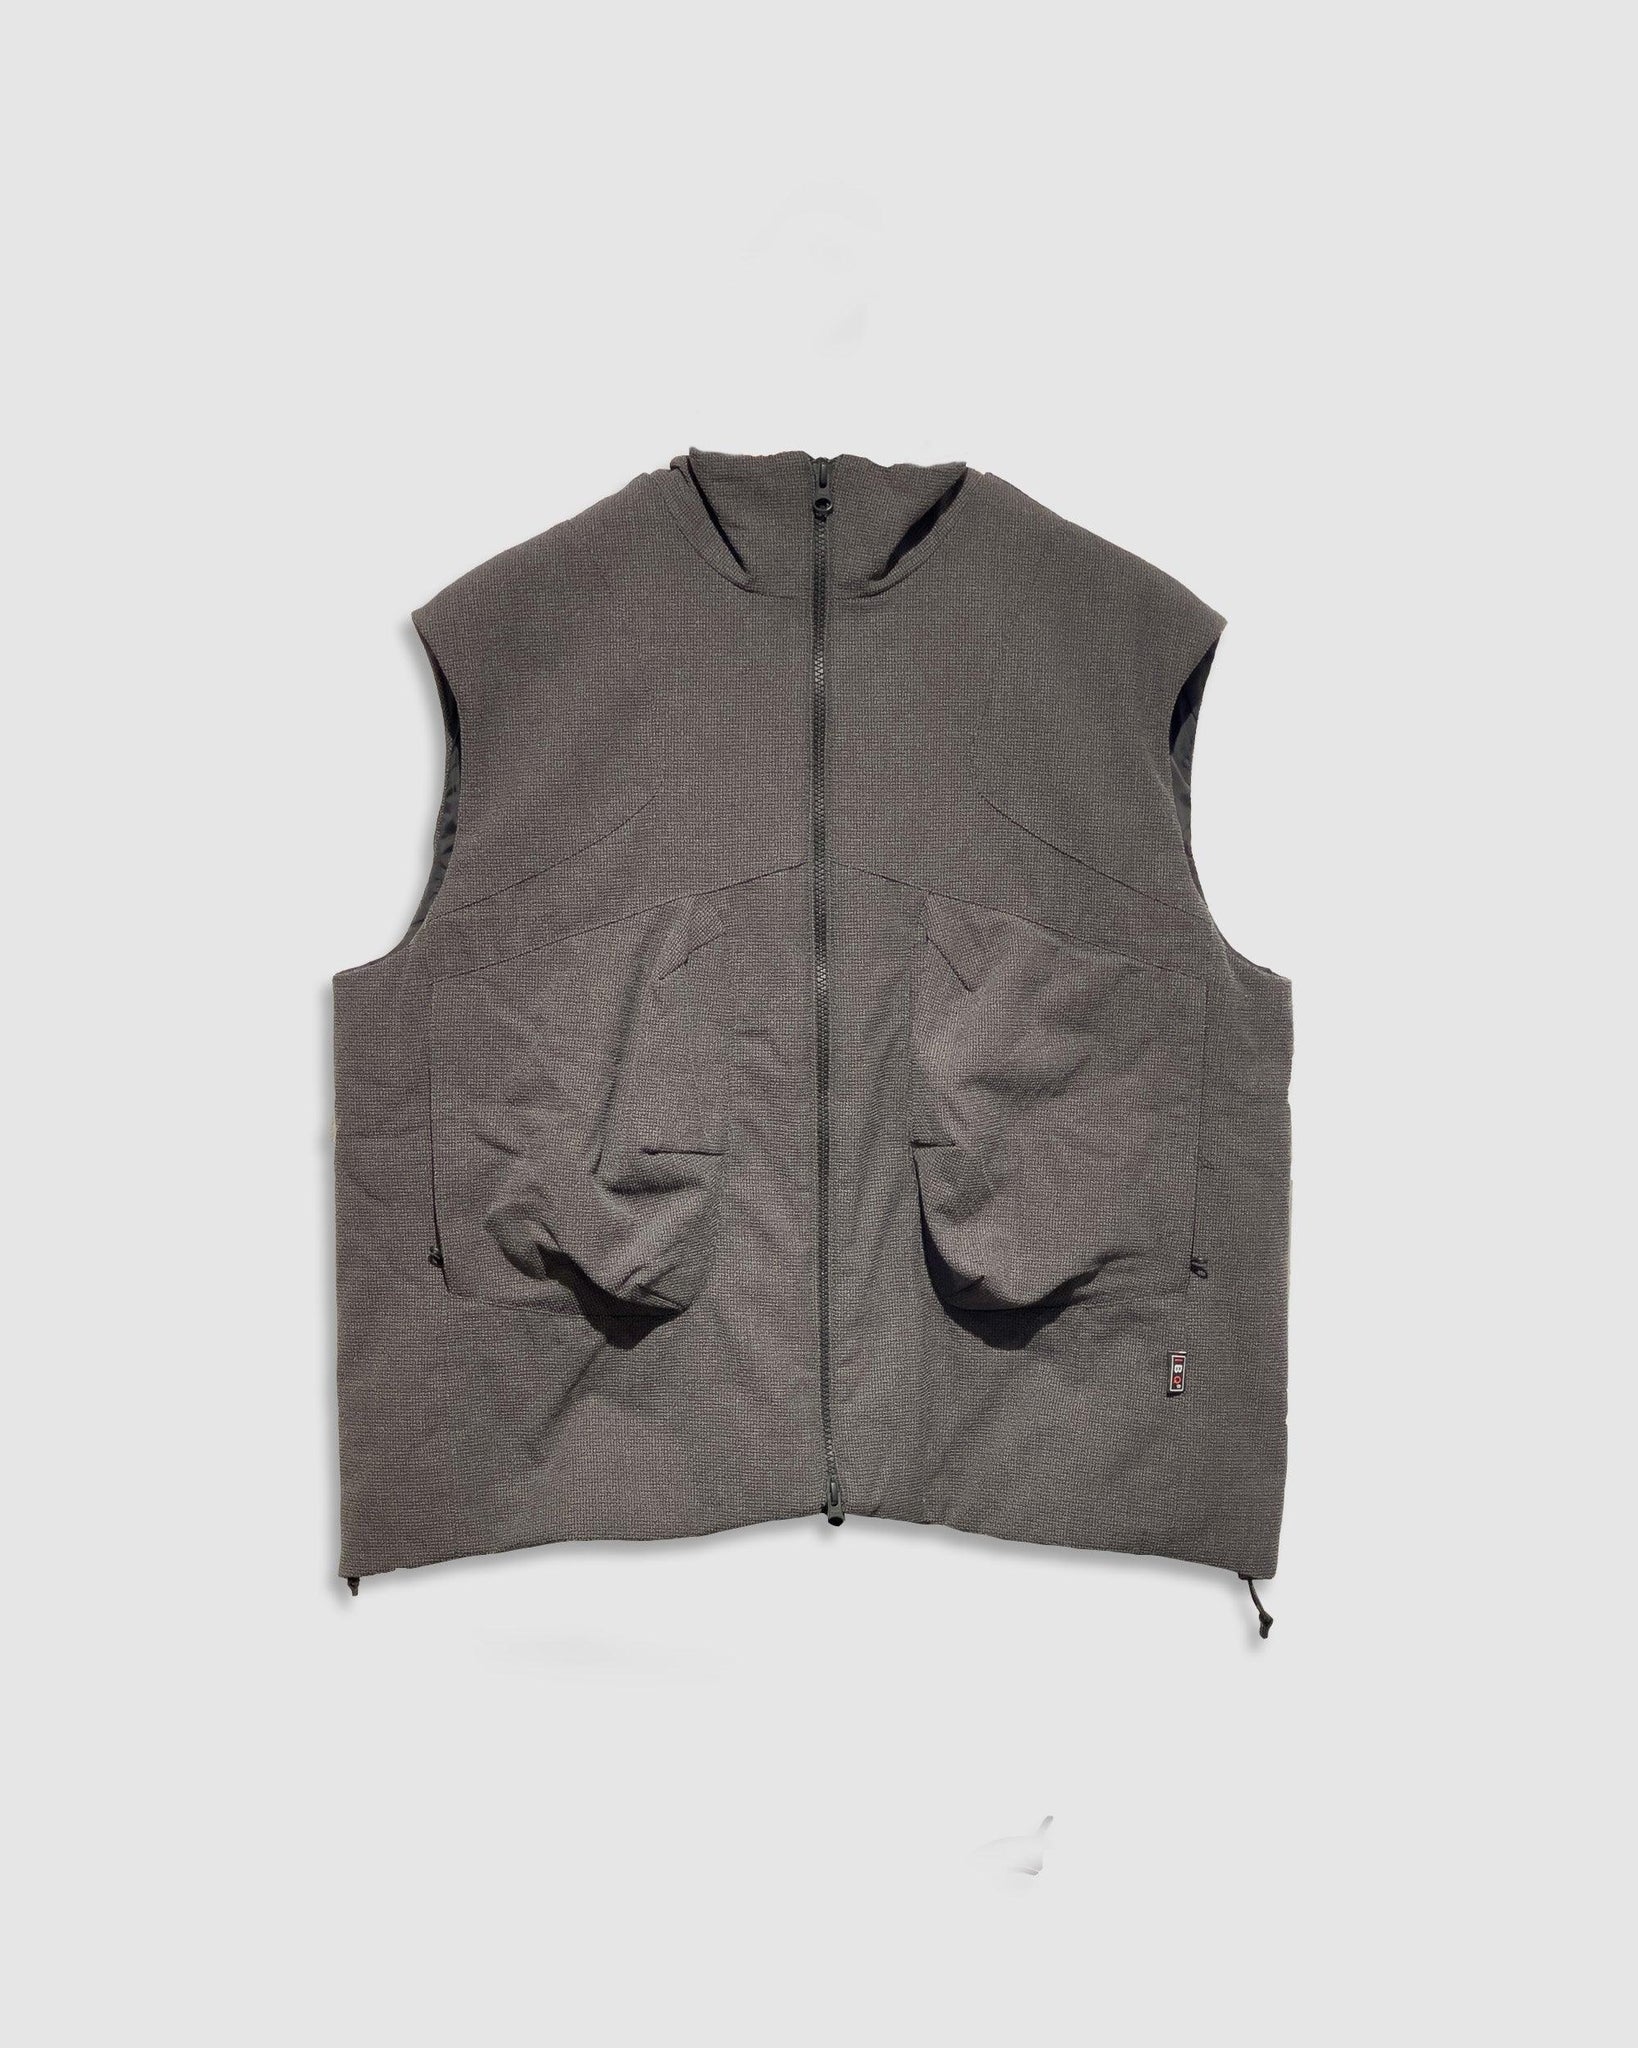 Rescue Padded Vest - {{ collection.title }} - Chinatown Country Club 